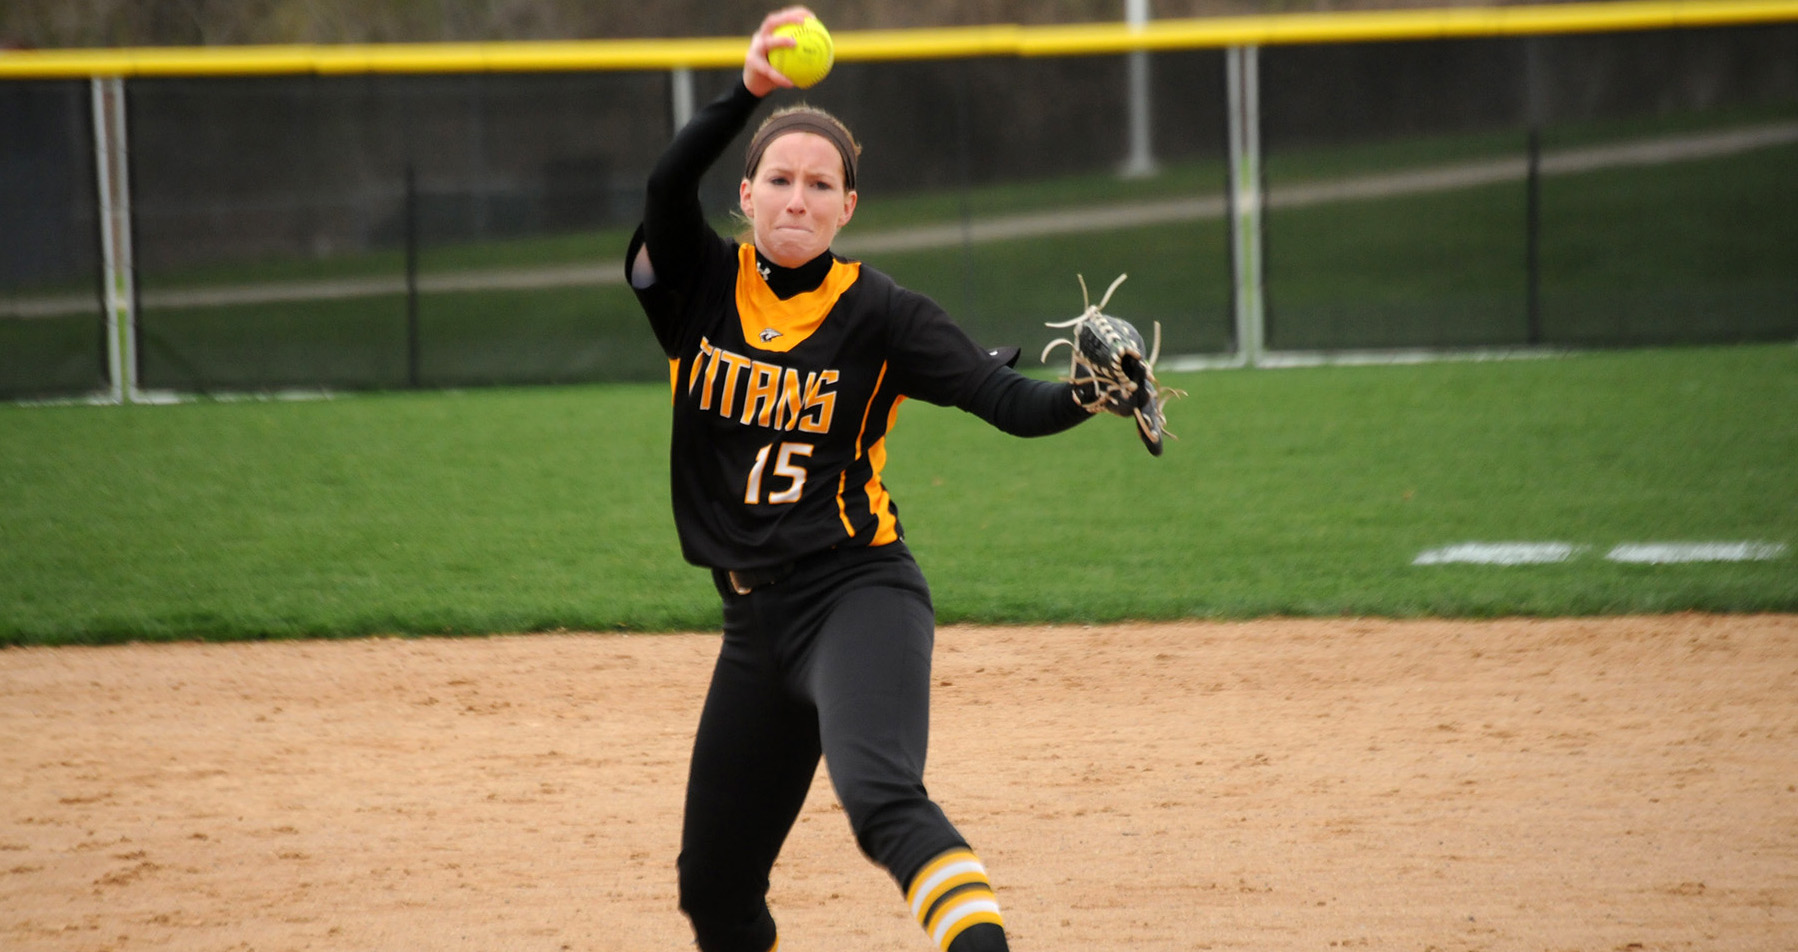 Sara Brunlieb pitched to only 26 batters in recording a four-hit shutout of the Blue Devils in the opener.